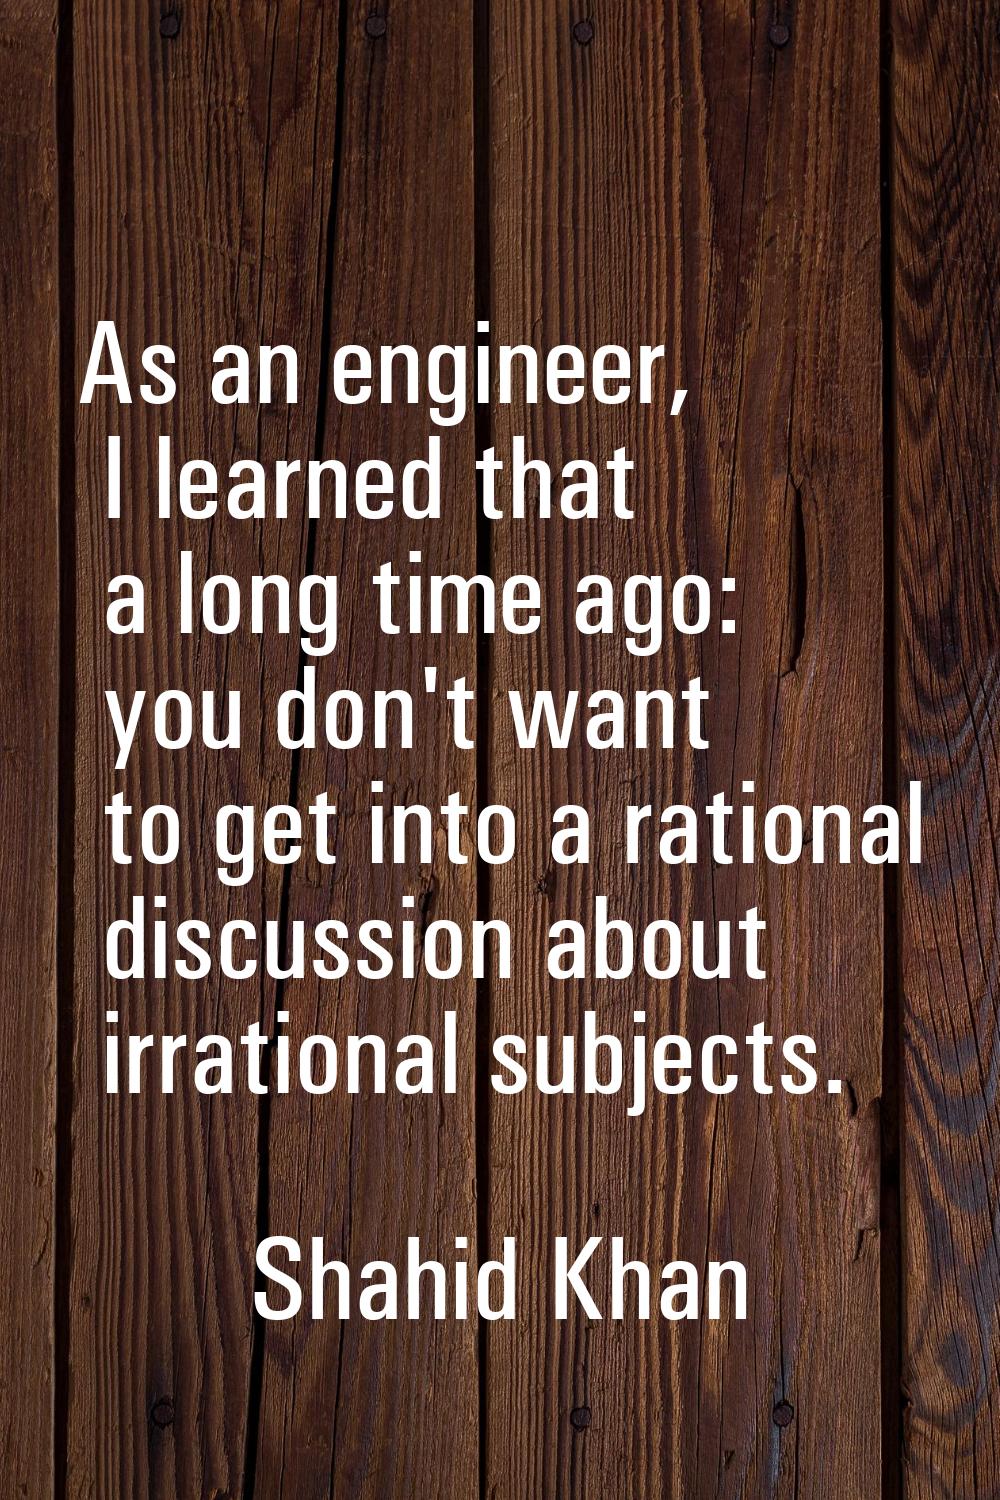 As an engineer, I learned that a long time ago: you don't want to get into a rational discussion ab